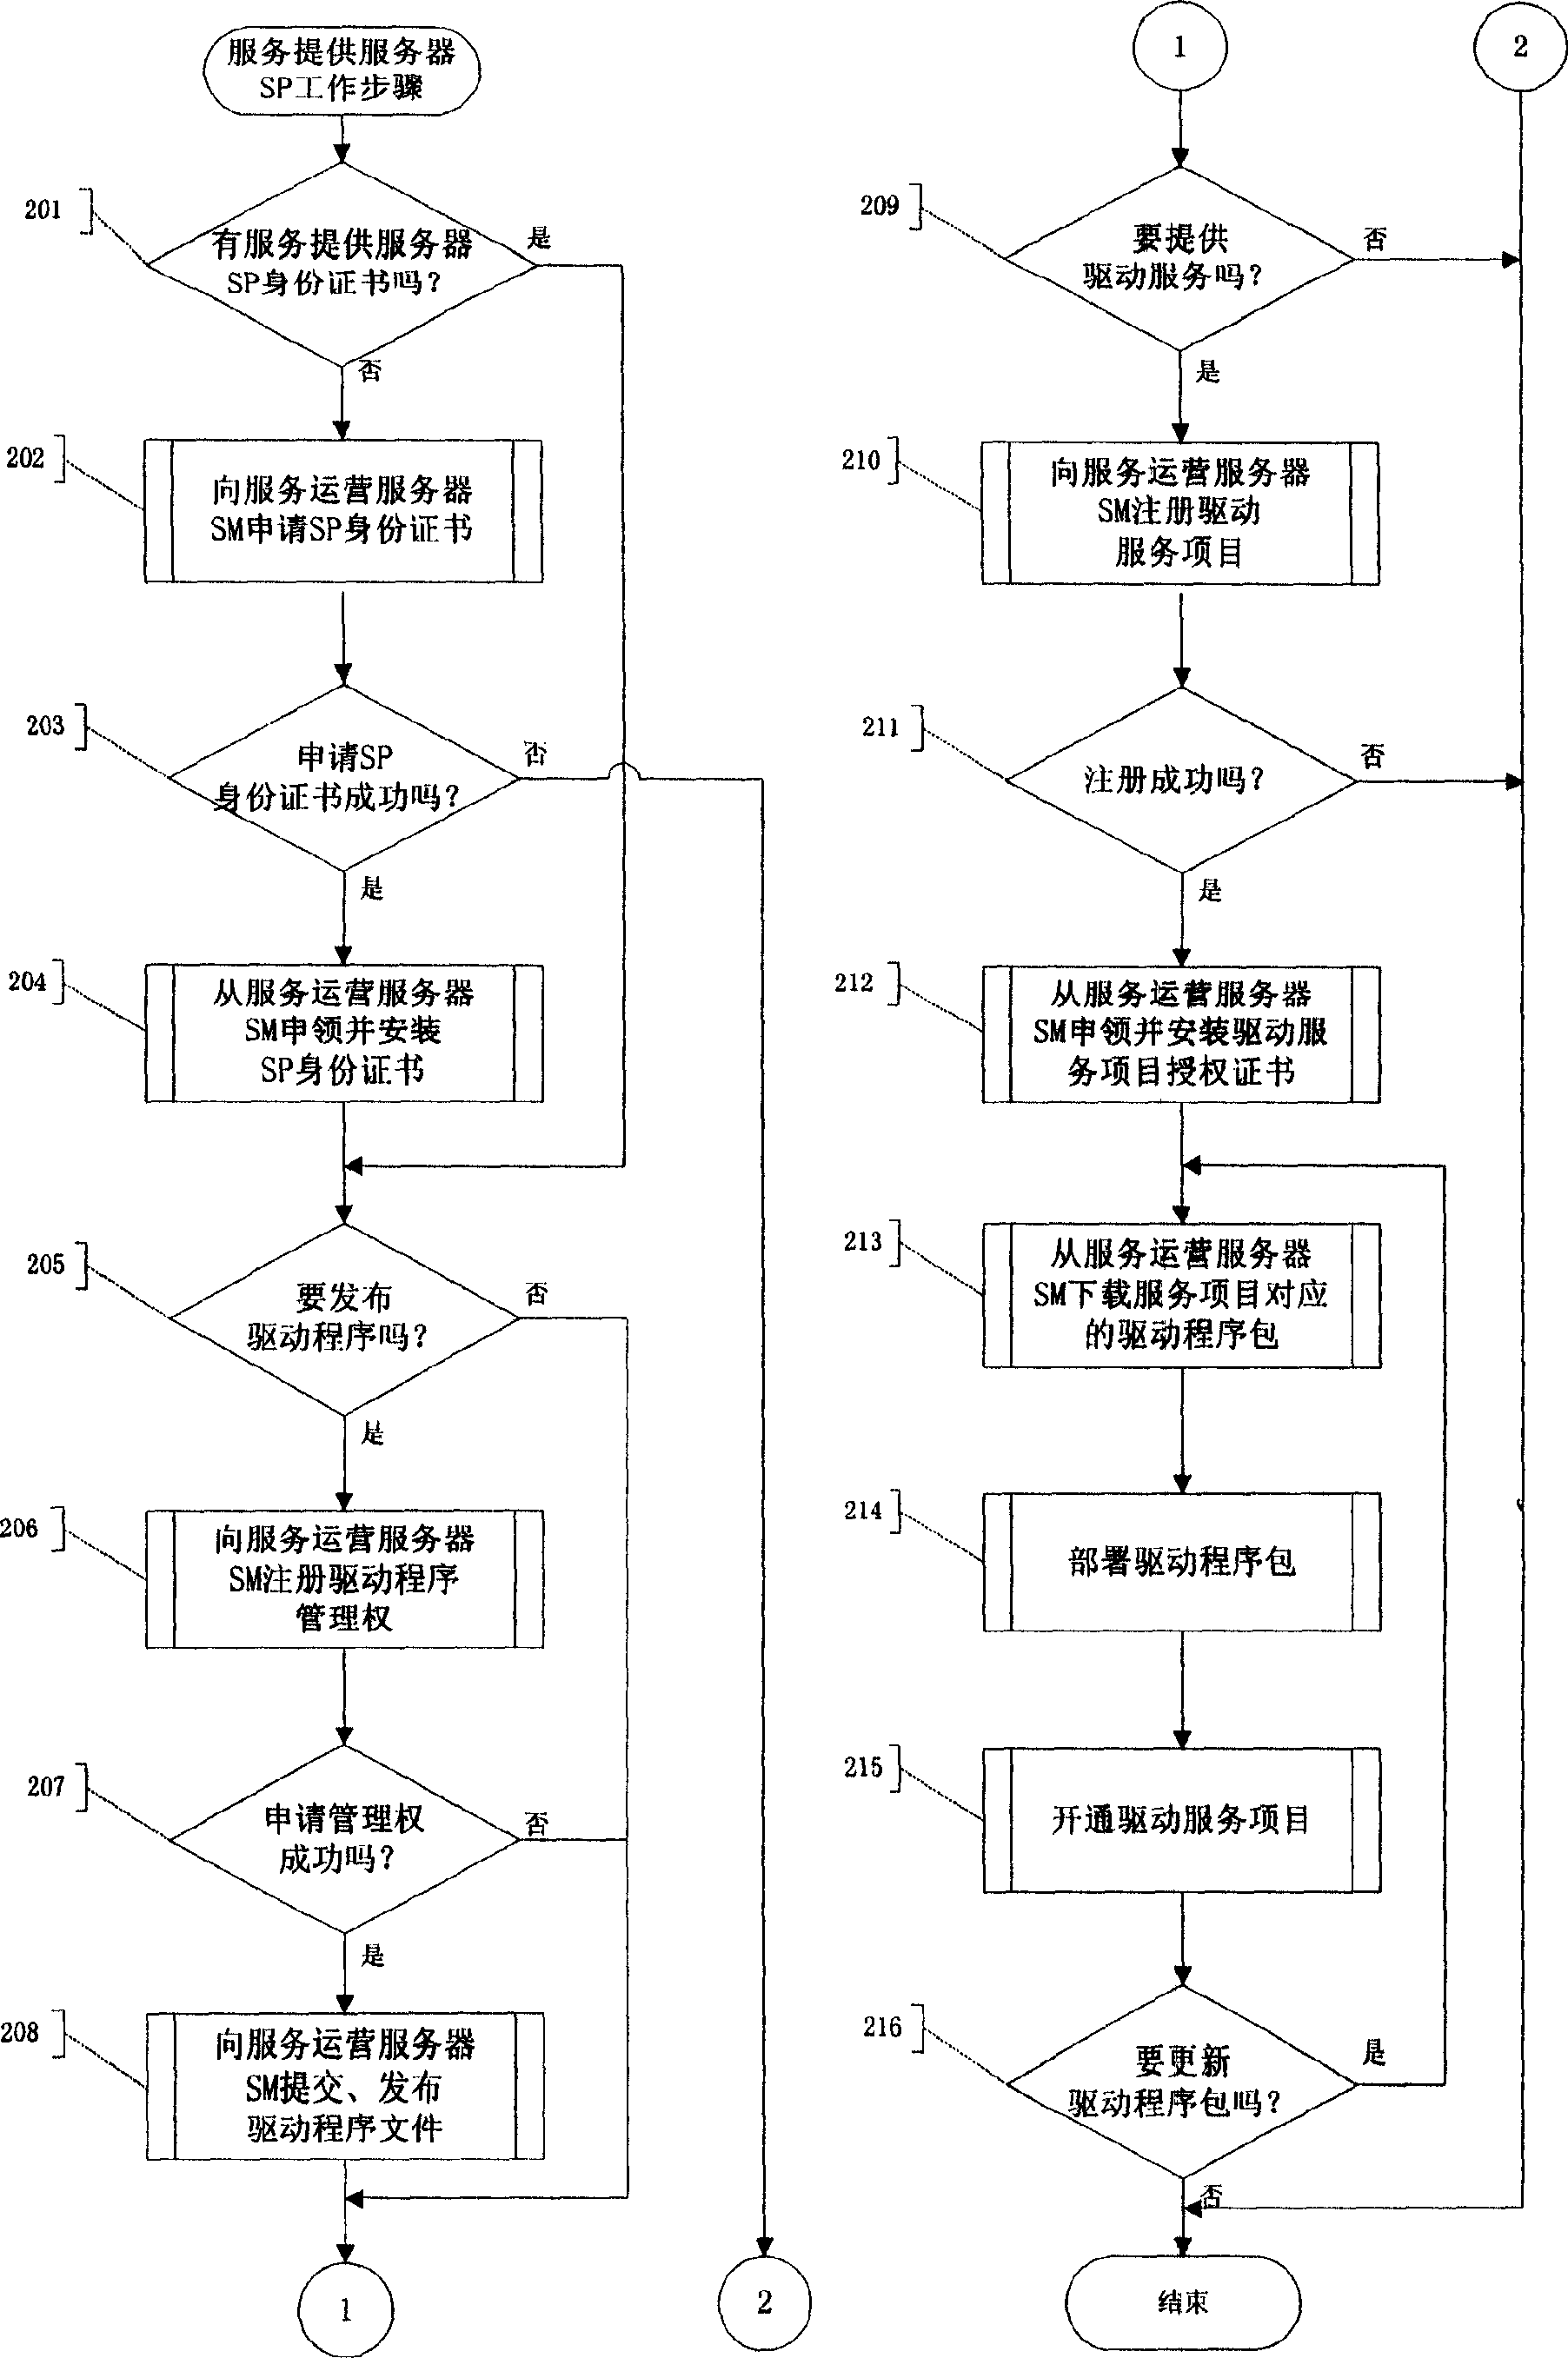 Method for implementing computer driving service security network system